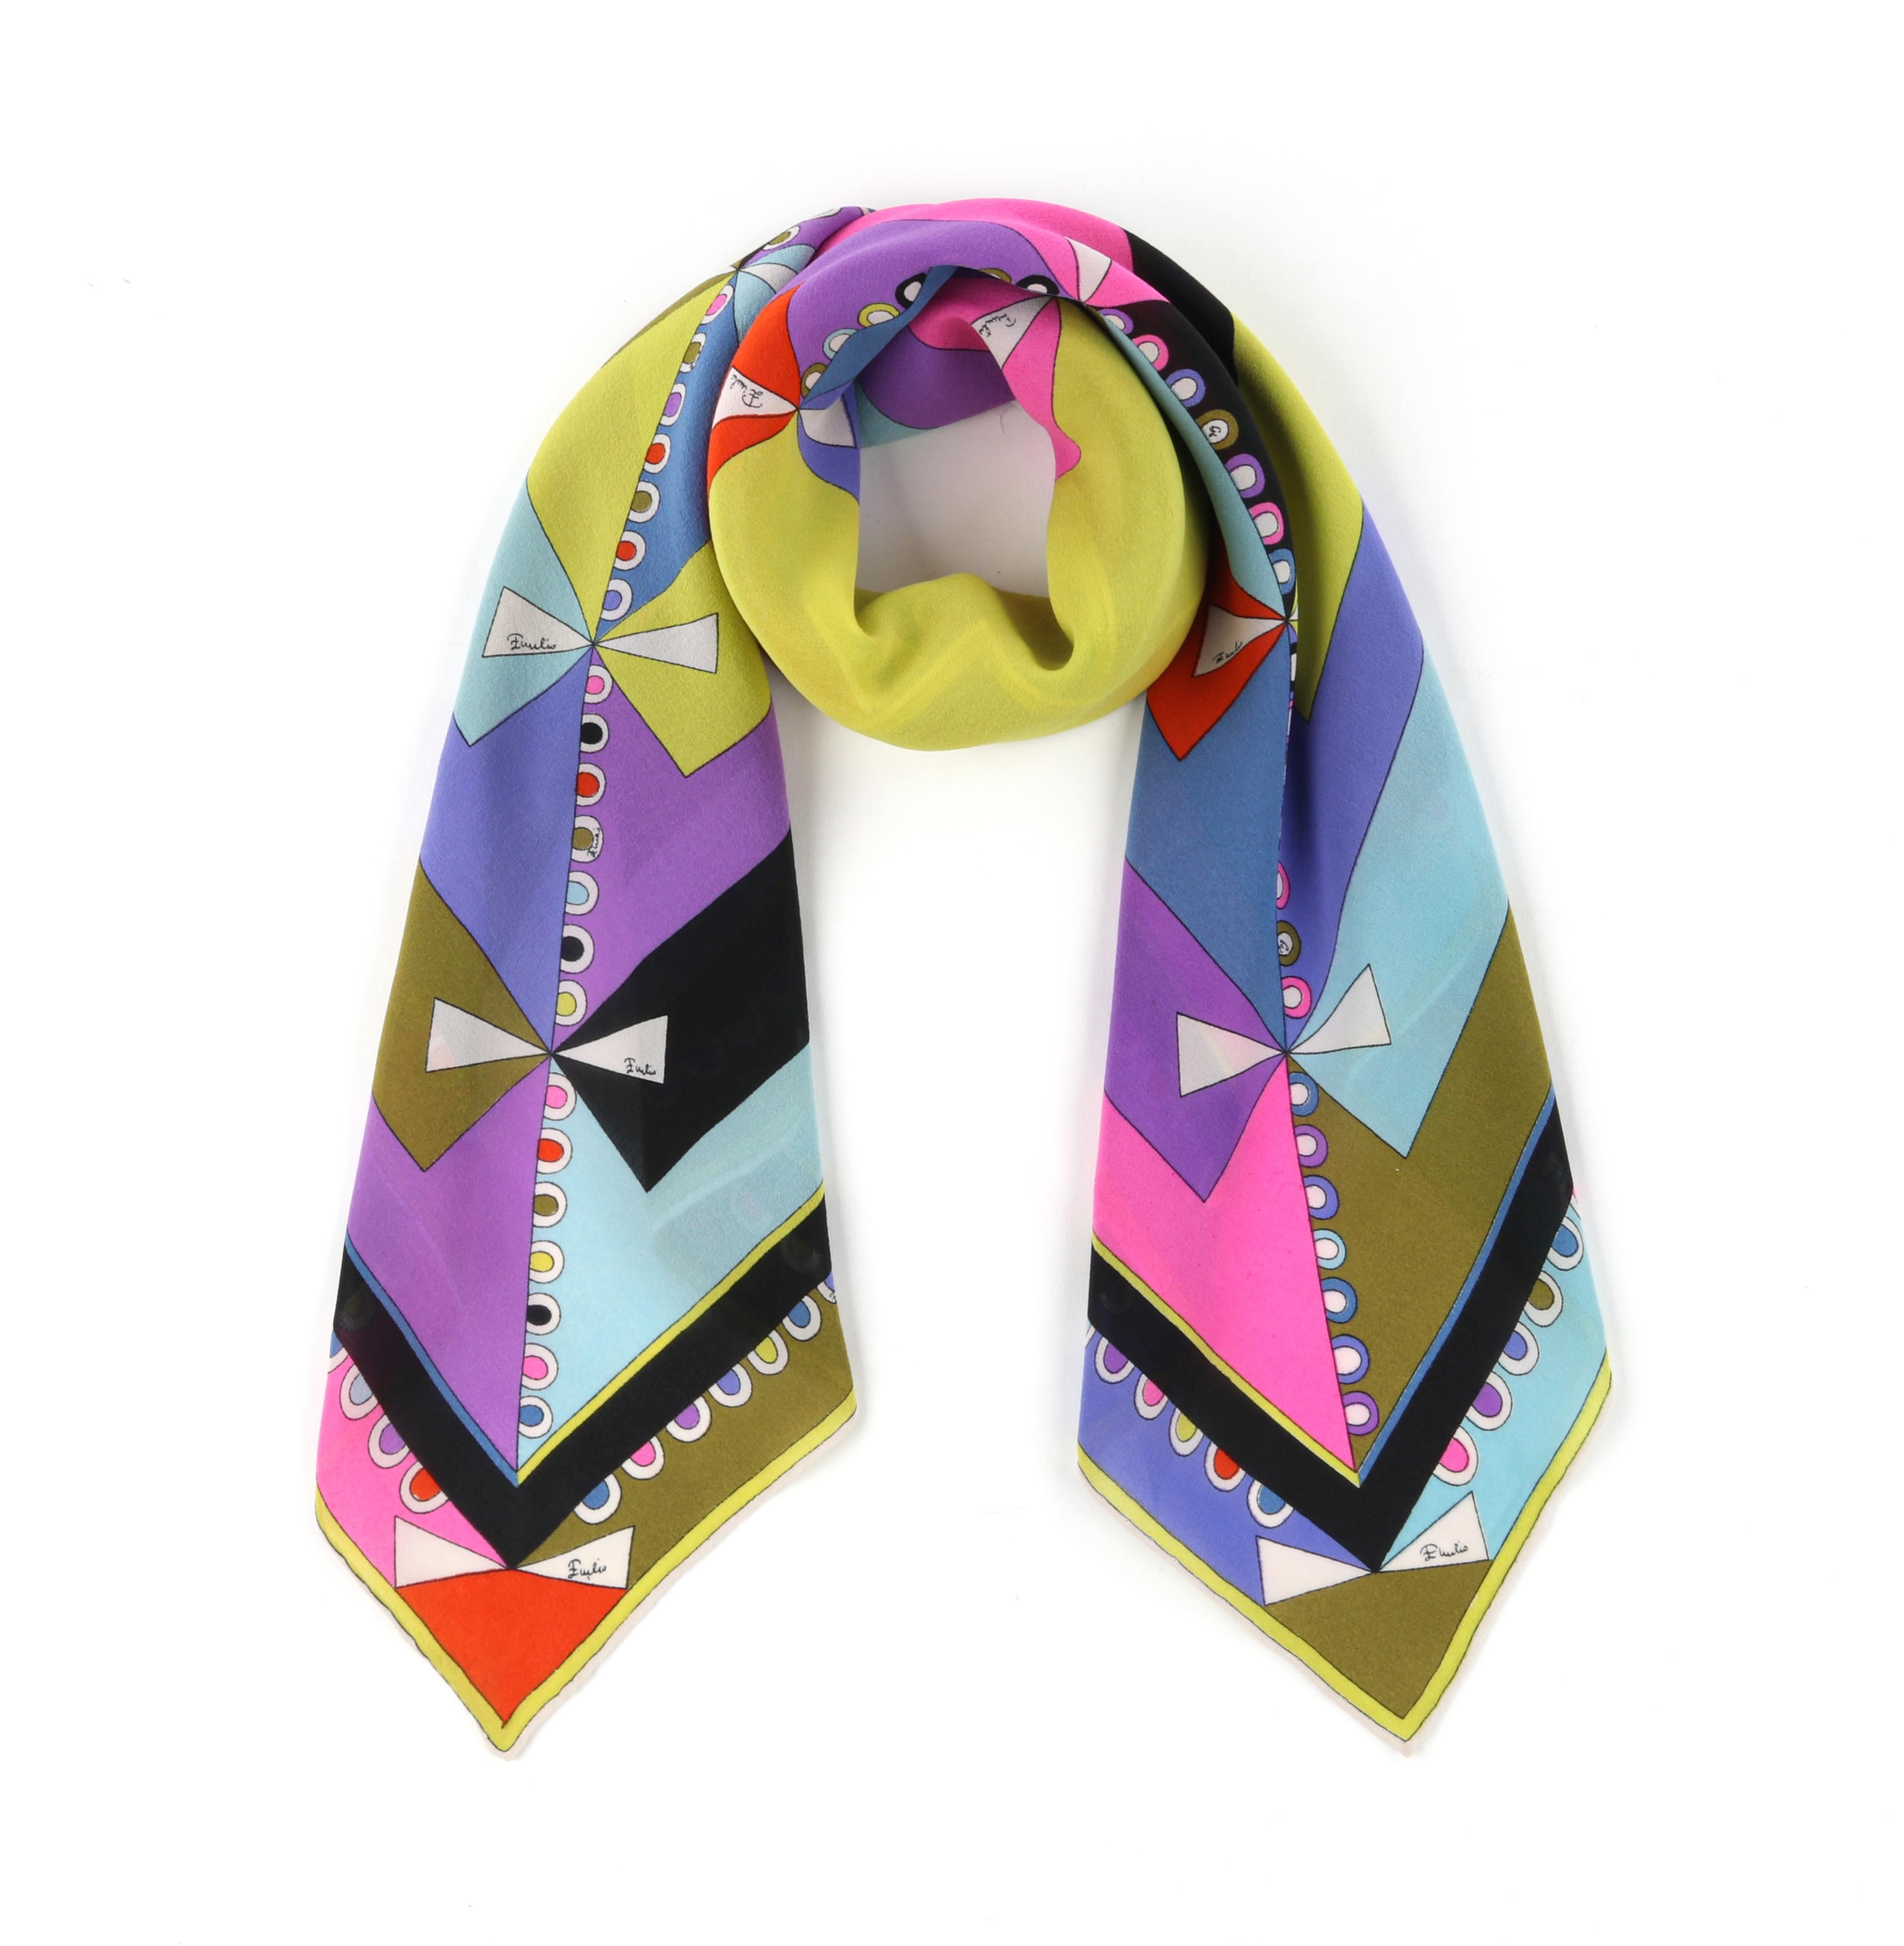 EMILIO PUCCI c.1960’s “Colletti” Op Art Geometric Ribbon Print Square Silk Scarf
 
Brand / Manufacturer: Emilio Pucci
Circa: 1960’s 
Style: Square scarf
Color(s): Multicolor
Lined: No 
Unmarked Fabric Content (feel of): Silk 
Additional Details /